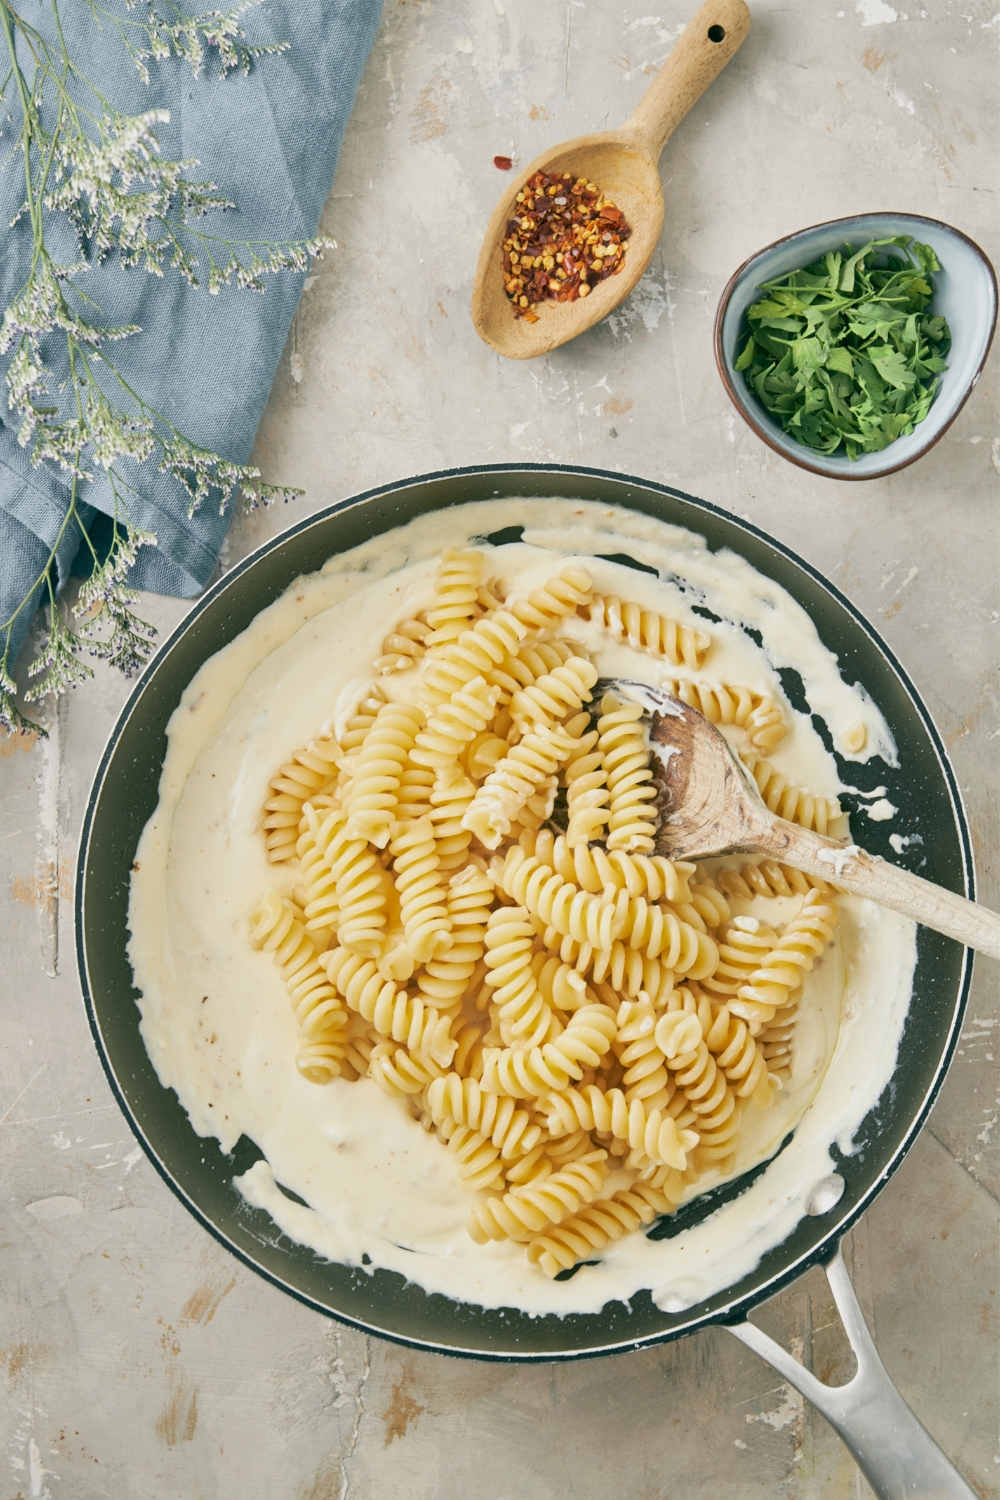 Fussili pasta being mixed with a wooden spoon in a pan filled with cream cheese sauce.